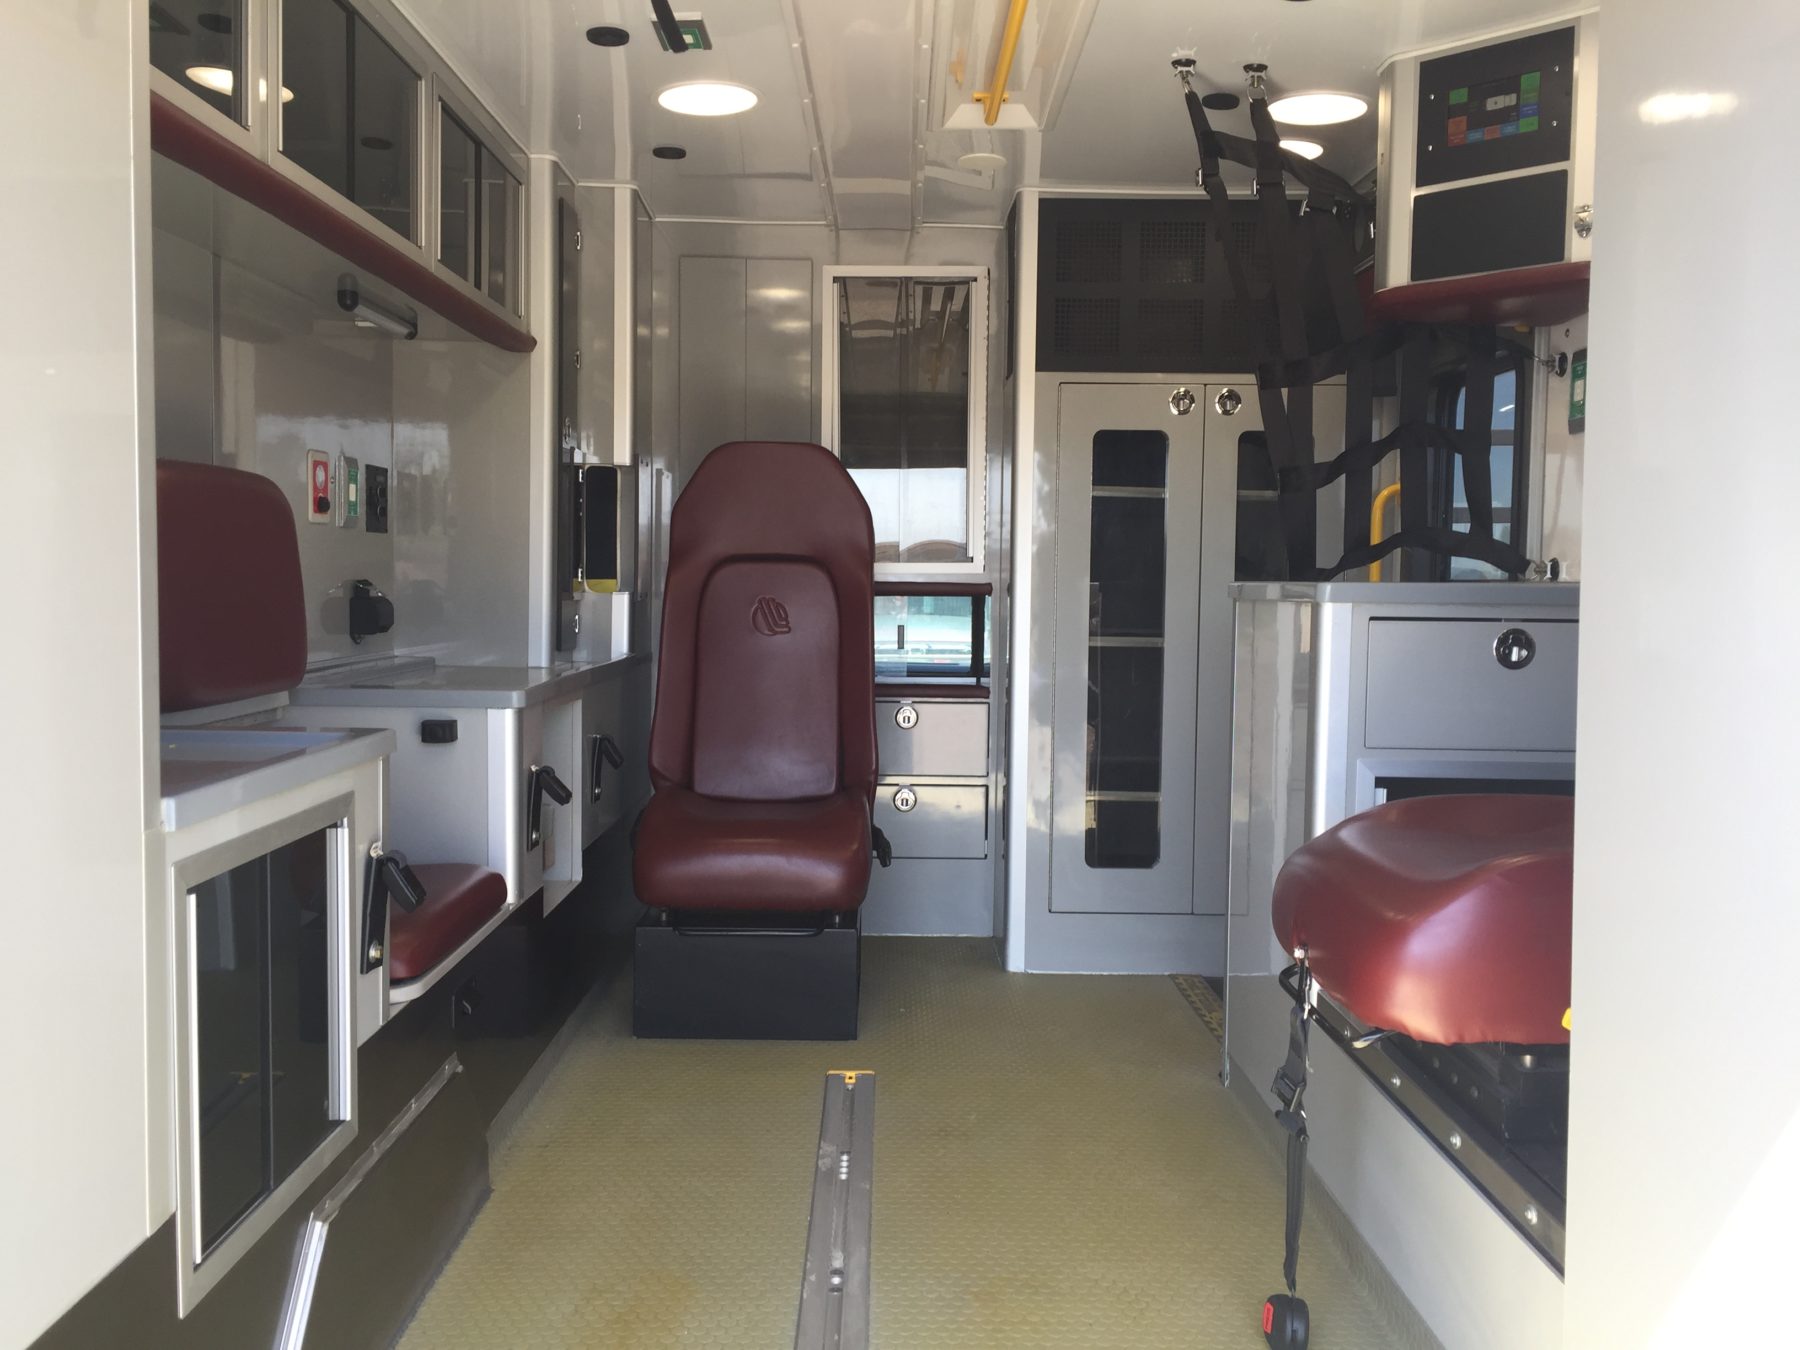 2015 Ford F450 4x4 Heavy Duty Ambulance For Sale – Picture 2